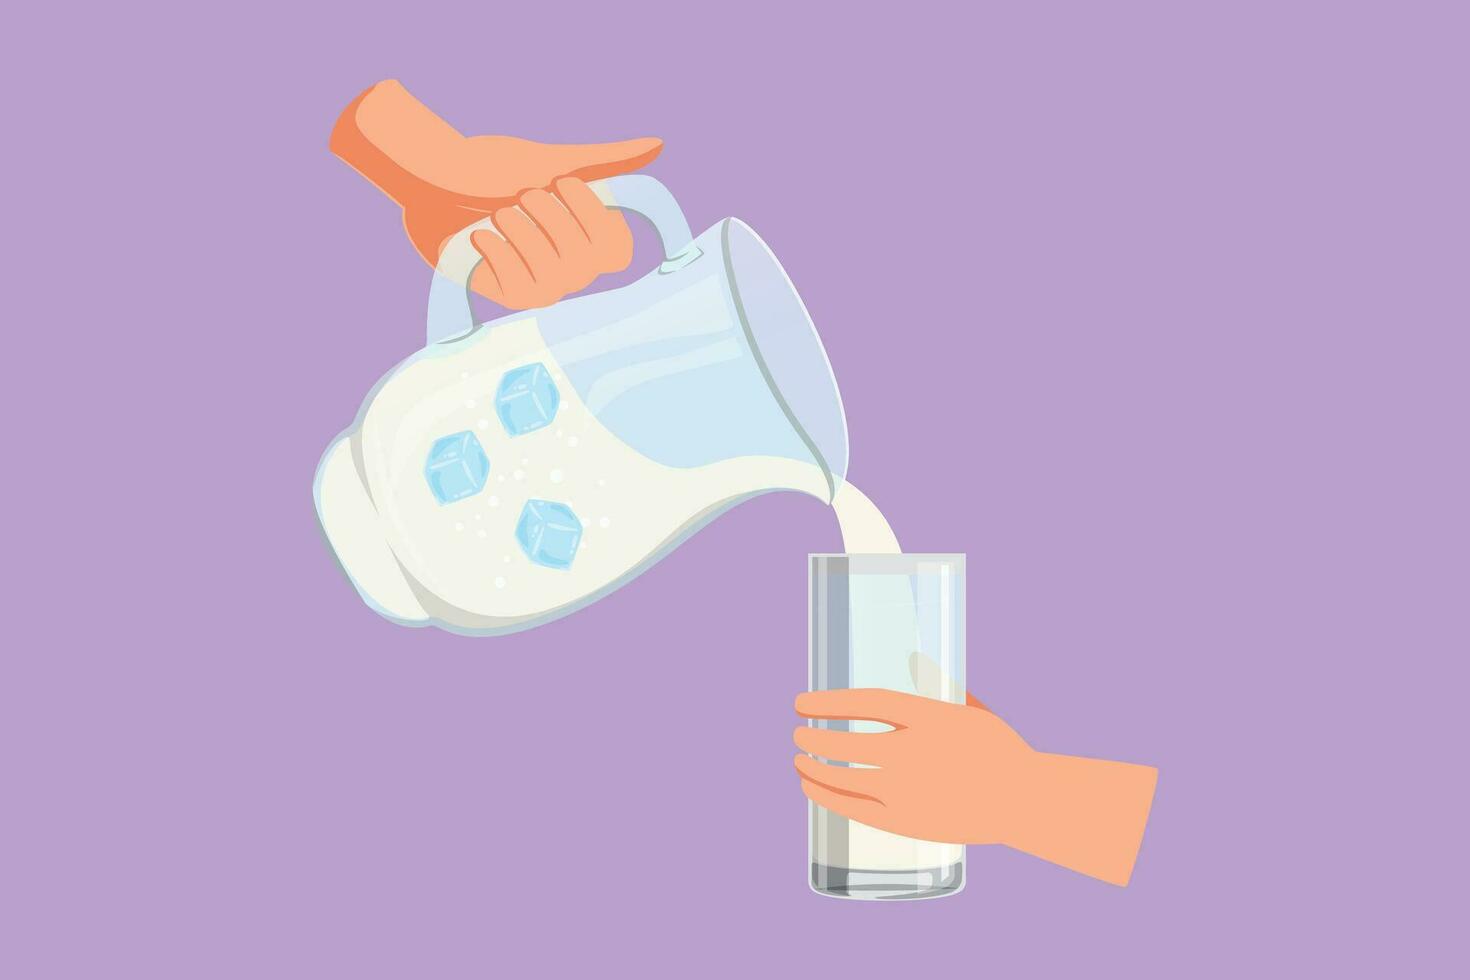 Graphic flat design drawing stylized human hand pouring fresh water from jug with ice into glass. Splashing and pouring pure aqua water in glass from pitcher symbol. Cartoon style vector illustration